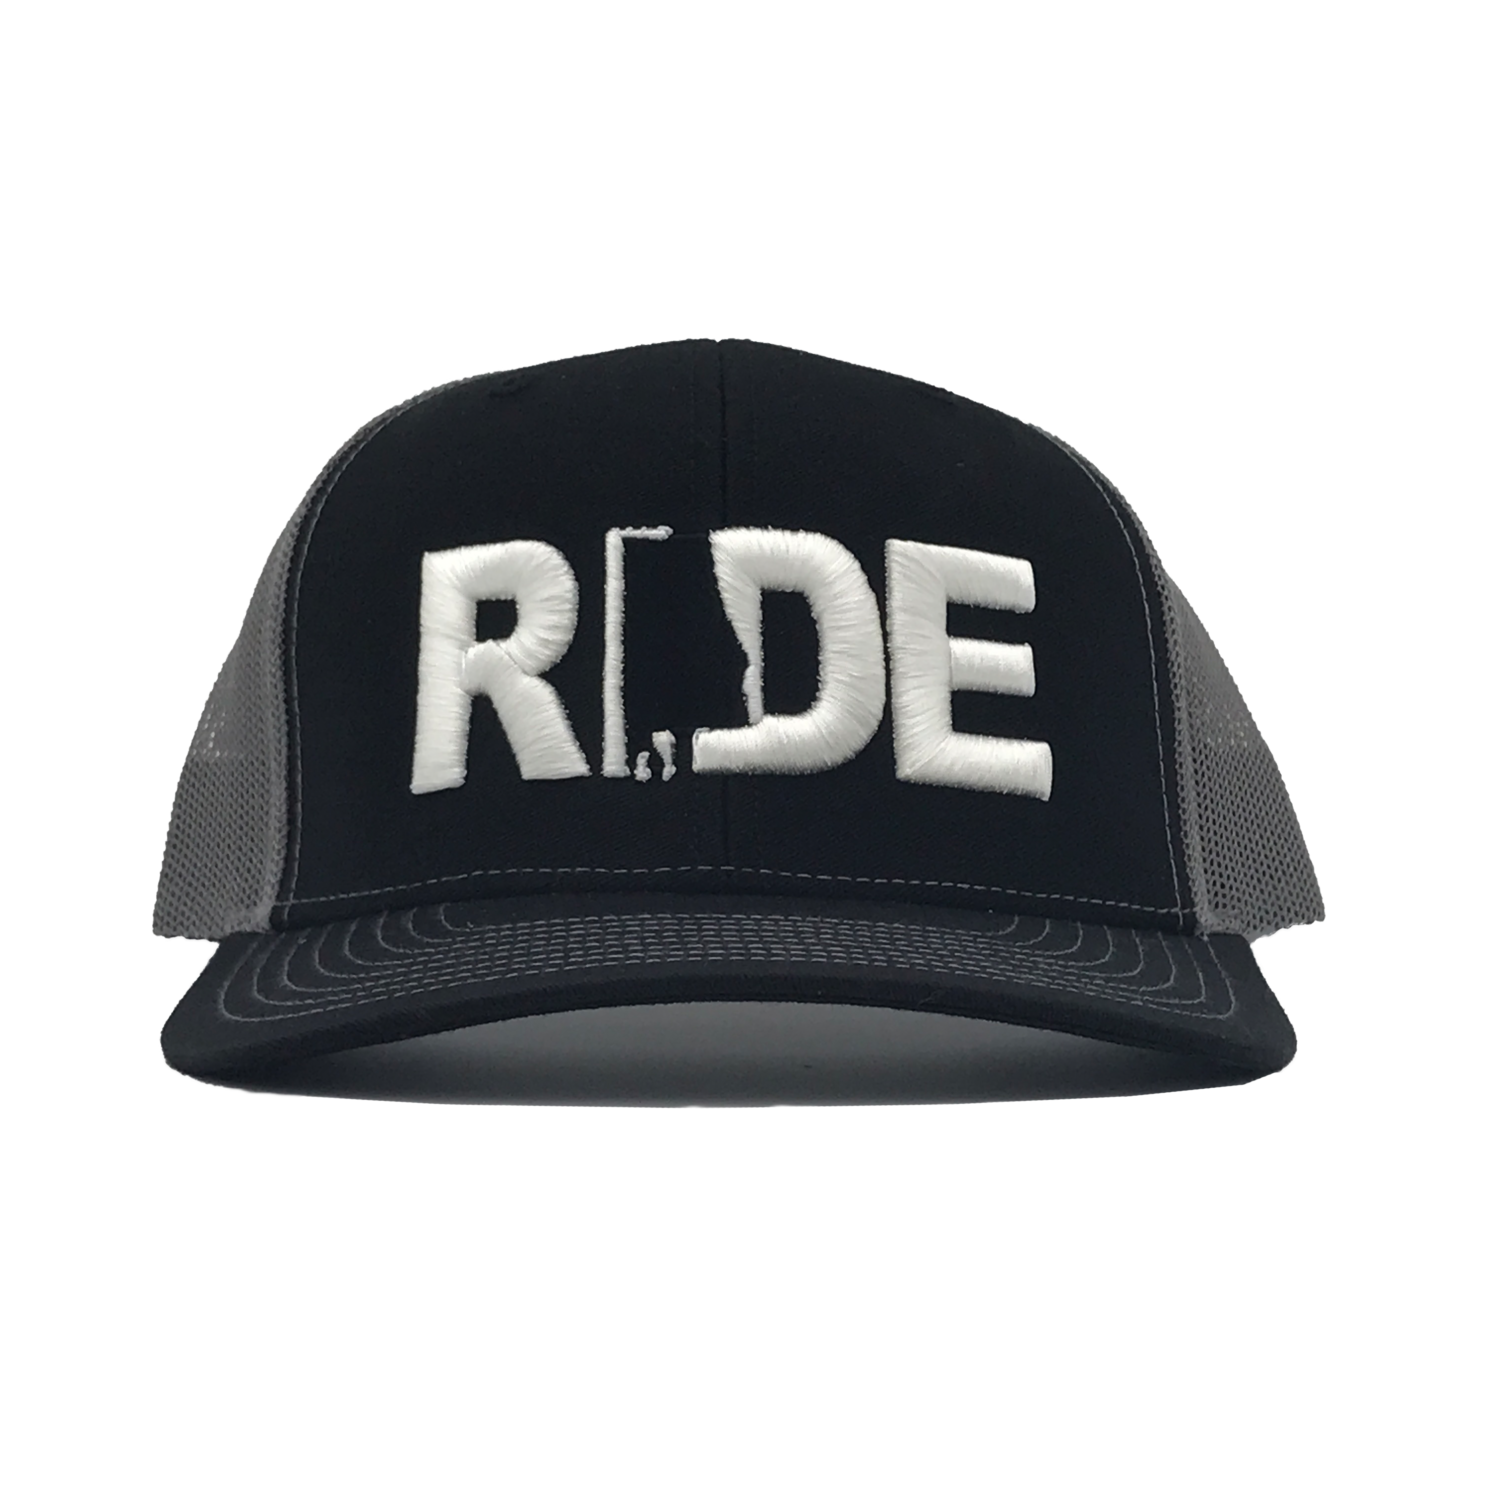 Ride Alabama Classic Pro 3D Puff Embroidered Snapback Trucker Hat Black/Gray